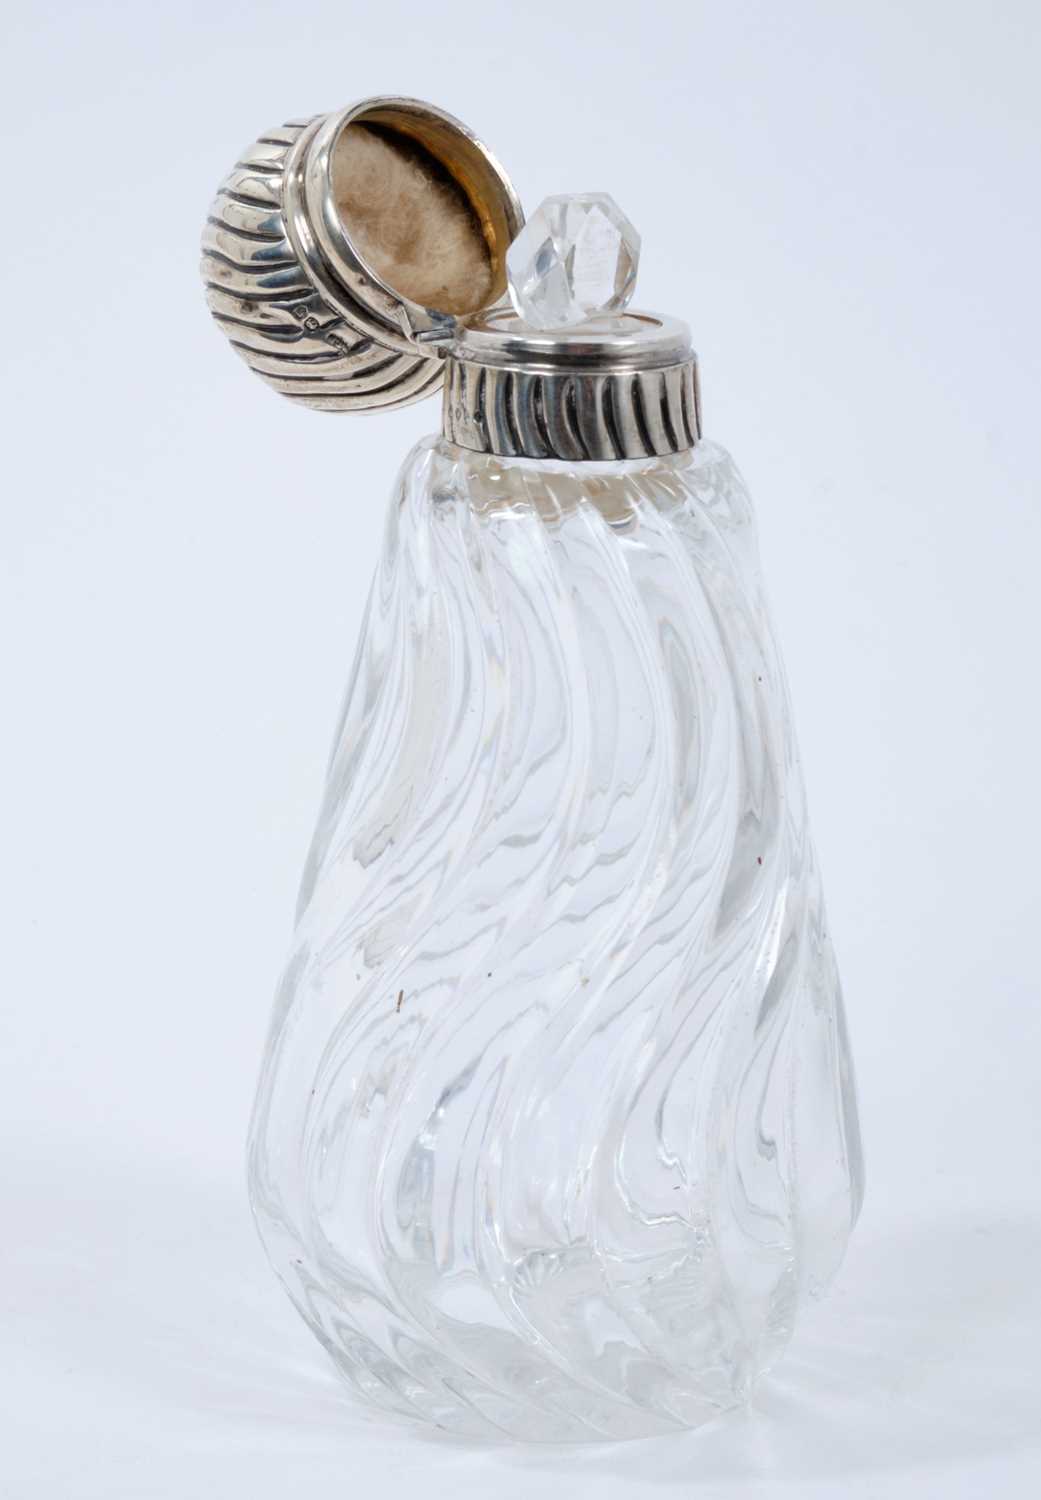 Victorian wrythen pattern cut glass toilet bottle of conical form with silver hinged cover - Image 2 of 2